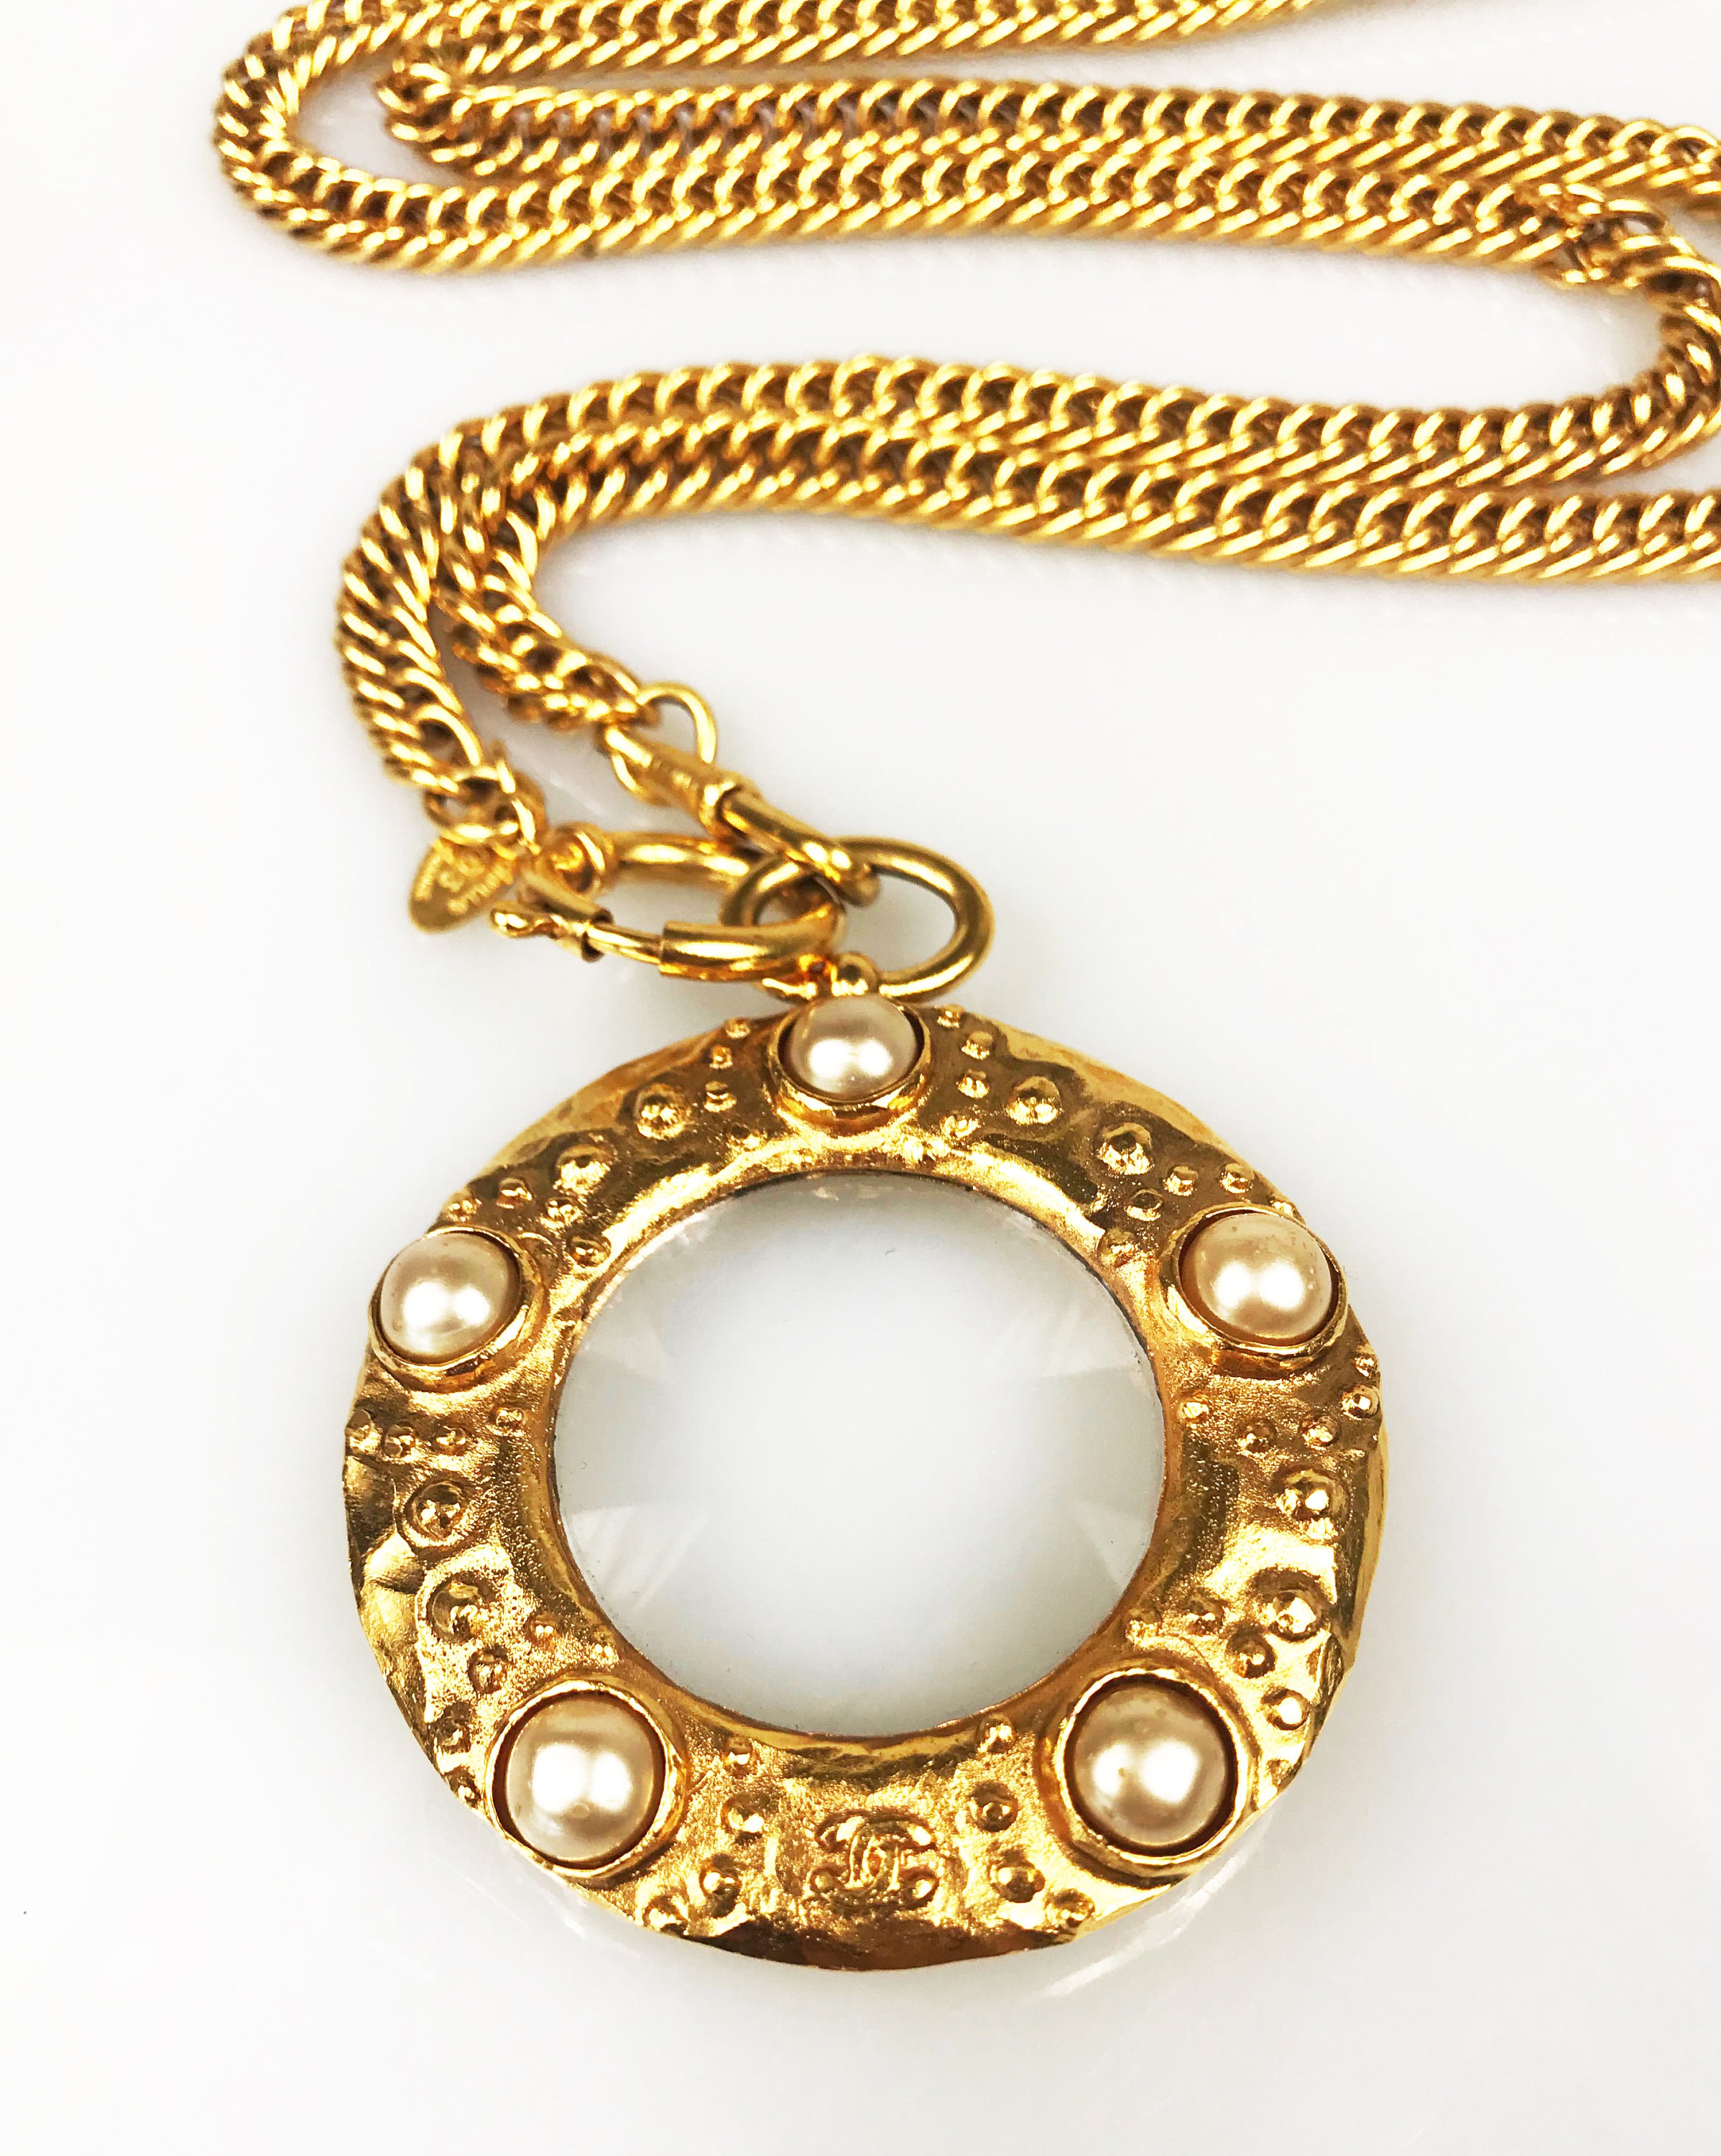 CHANEL] Chanel Loupe necklace Double chain vintage gold plating